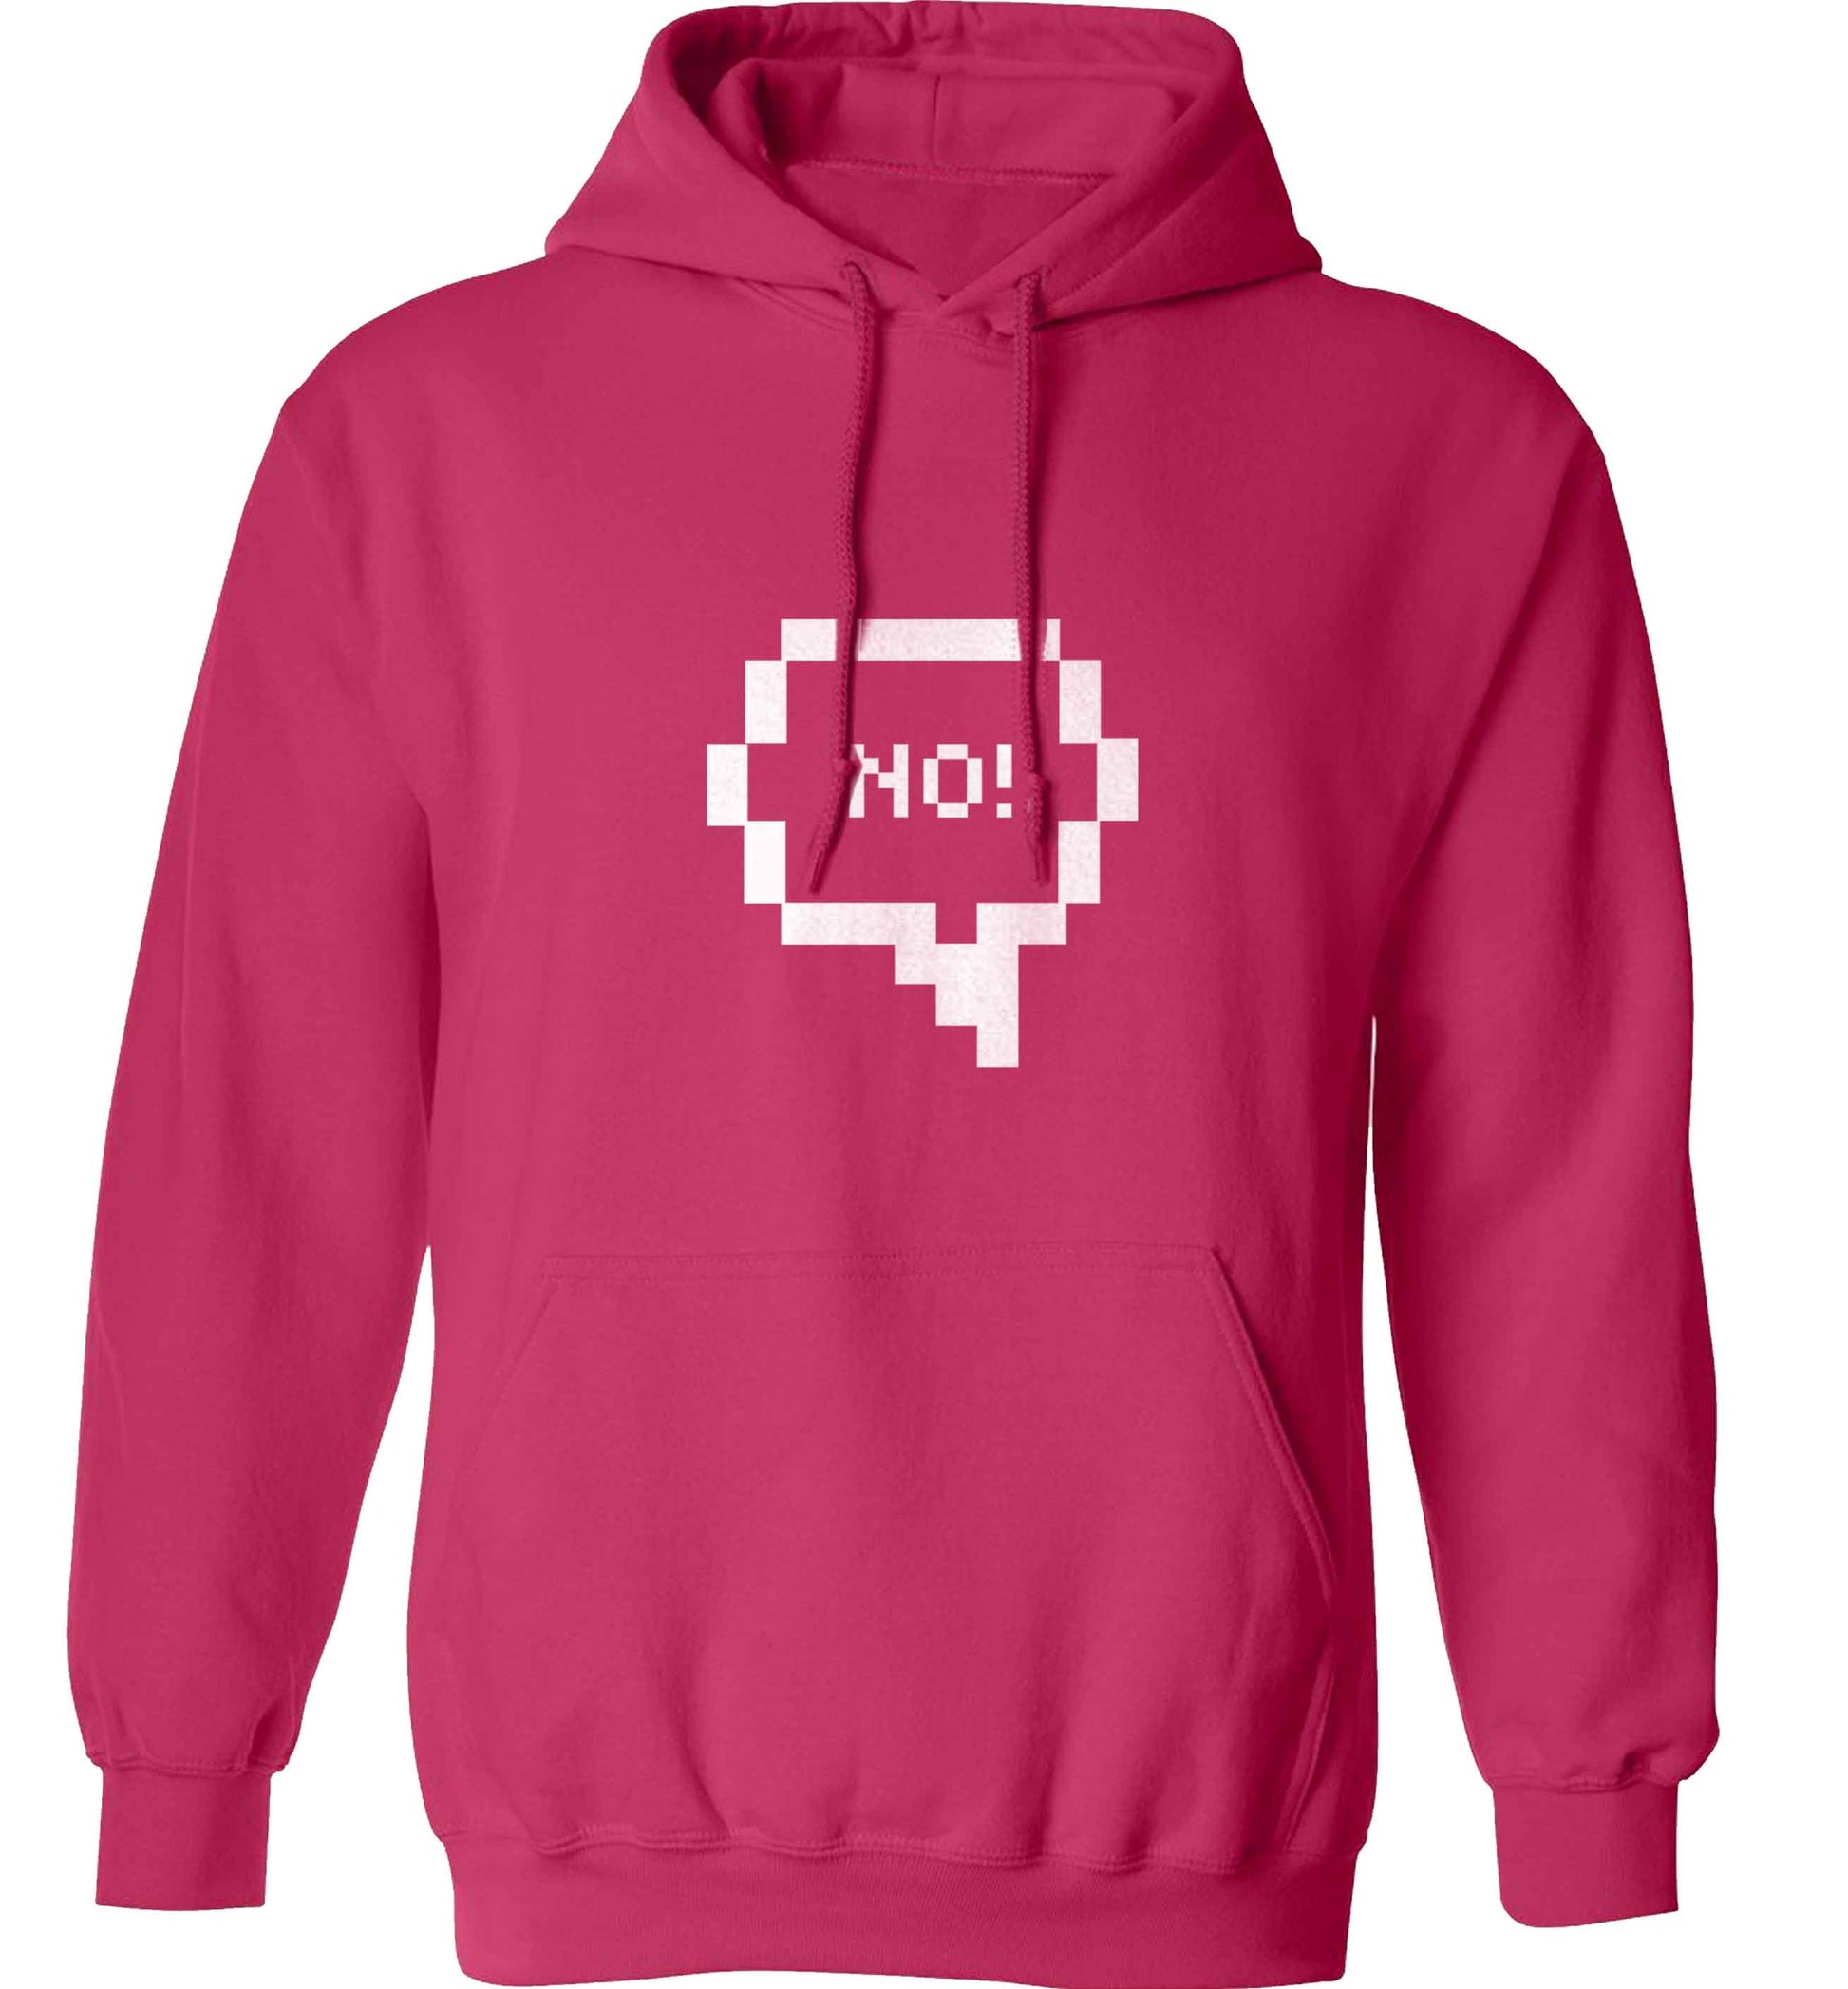 No adults unisex pink hoodie 2XL